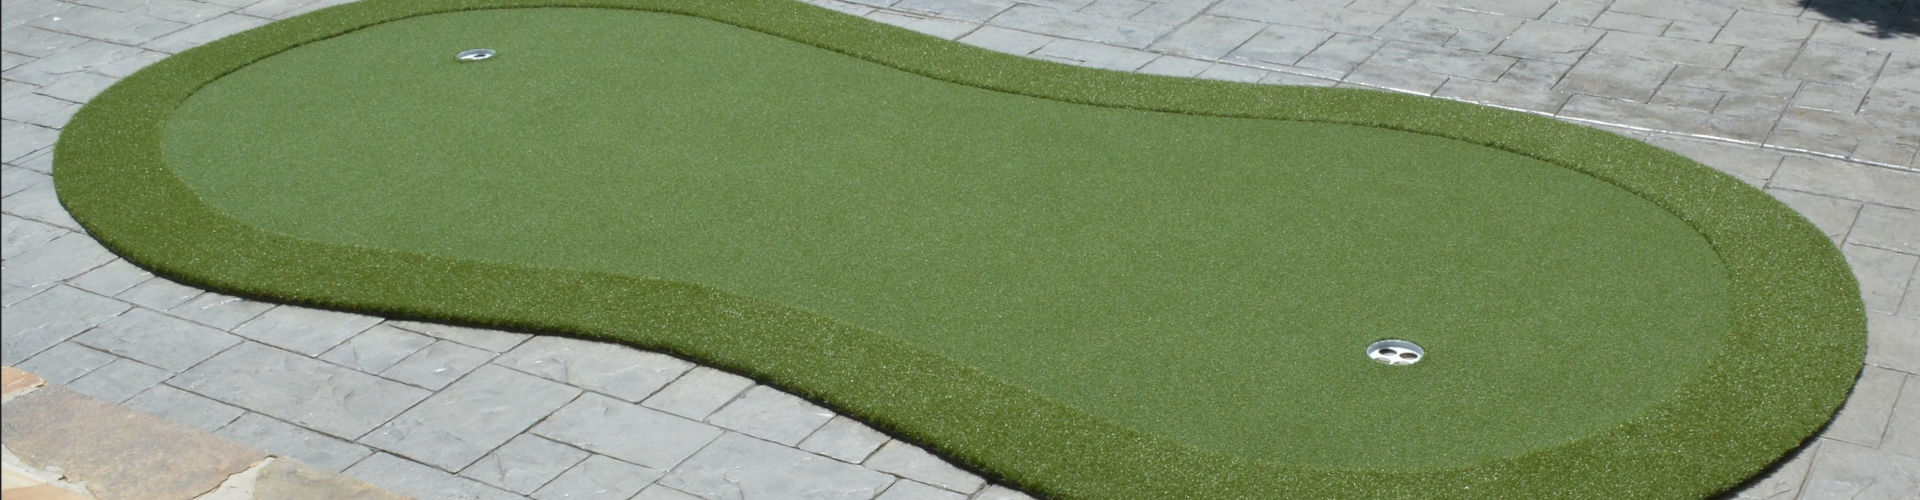 Southwest Greens of Tucson Portable Putting Green